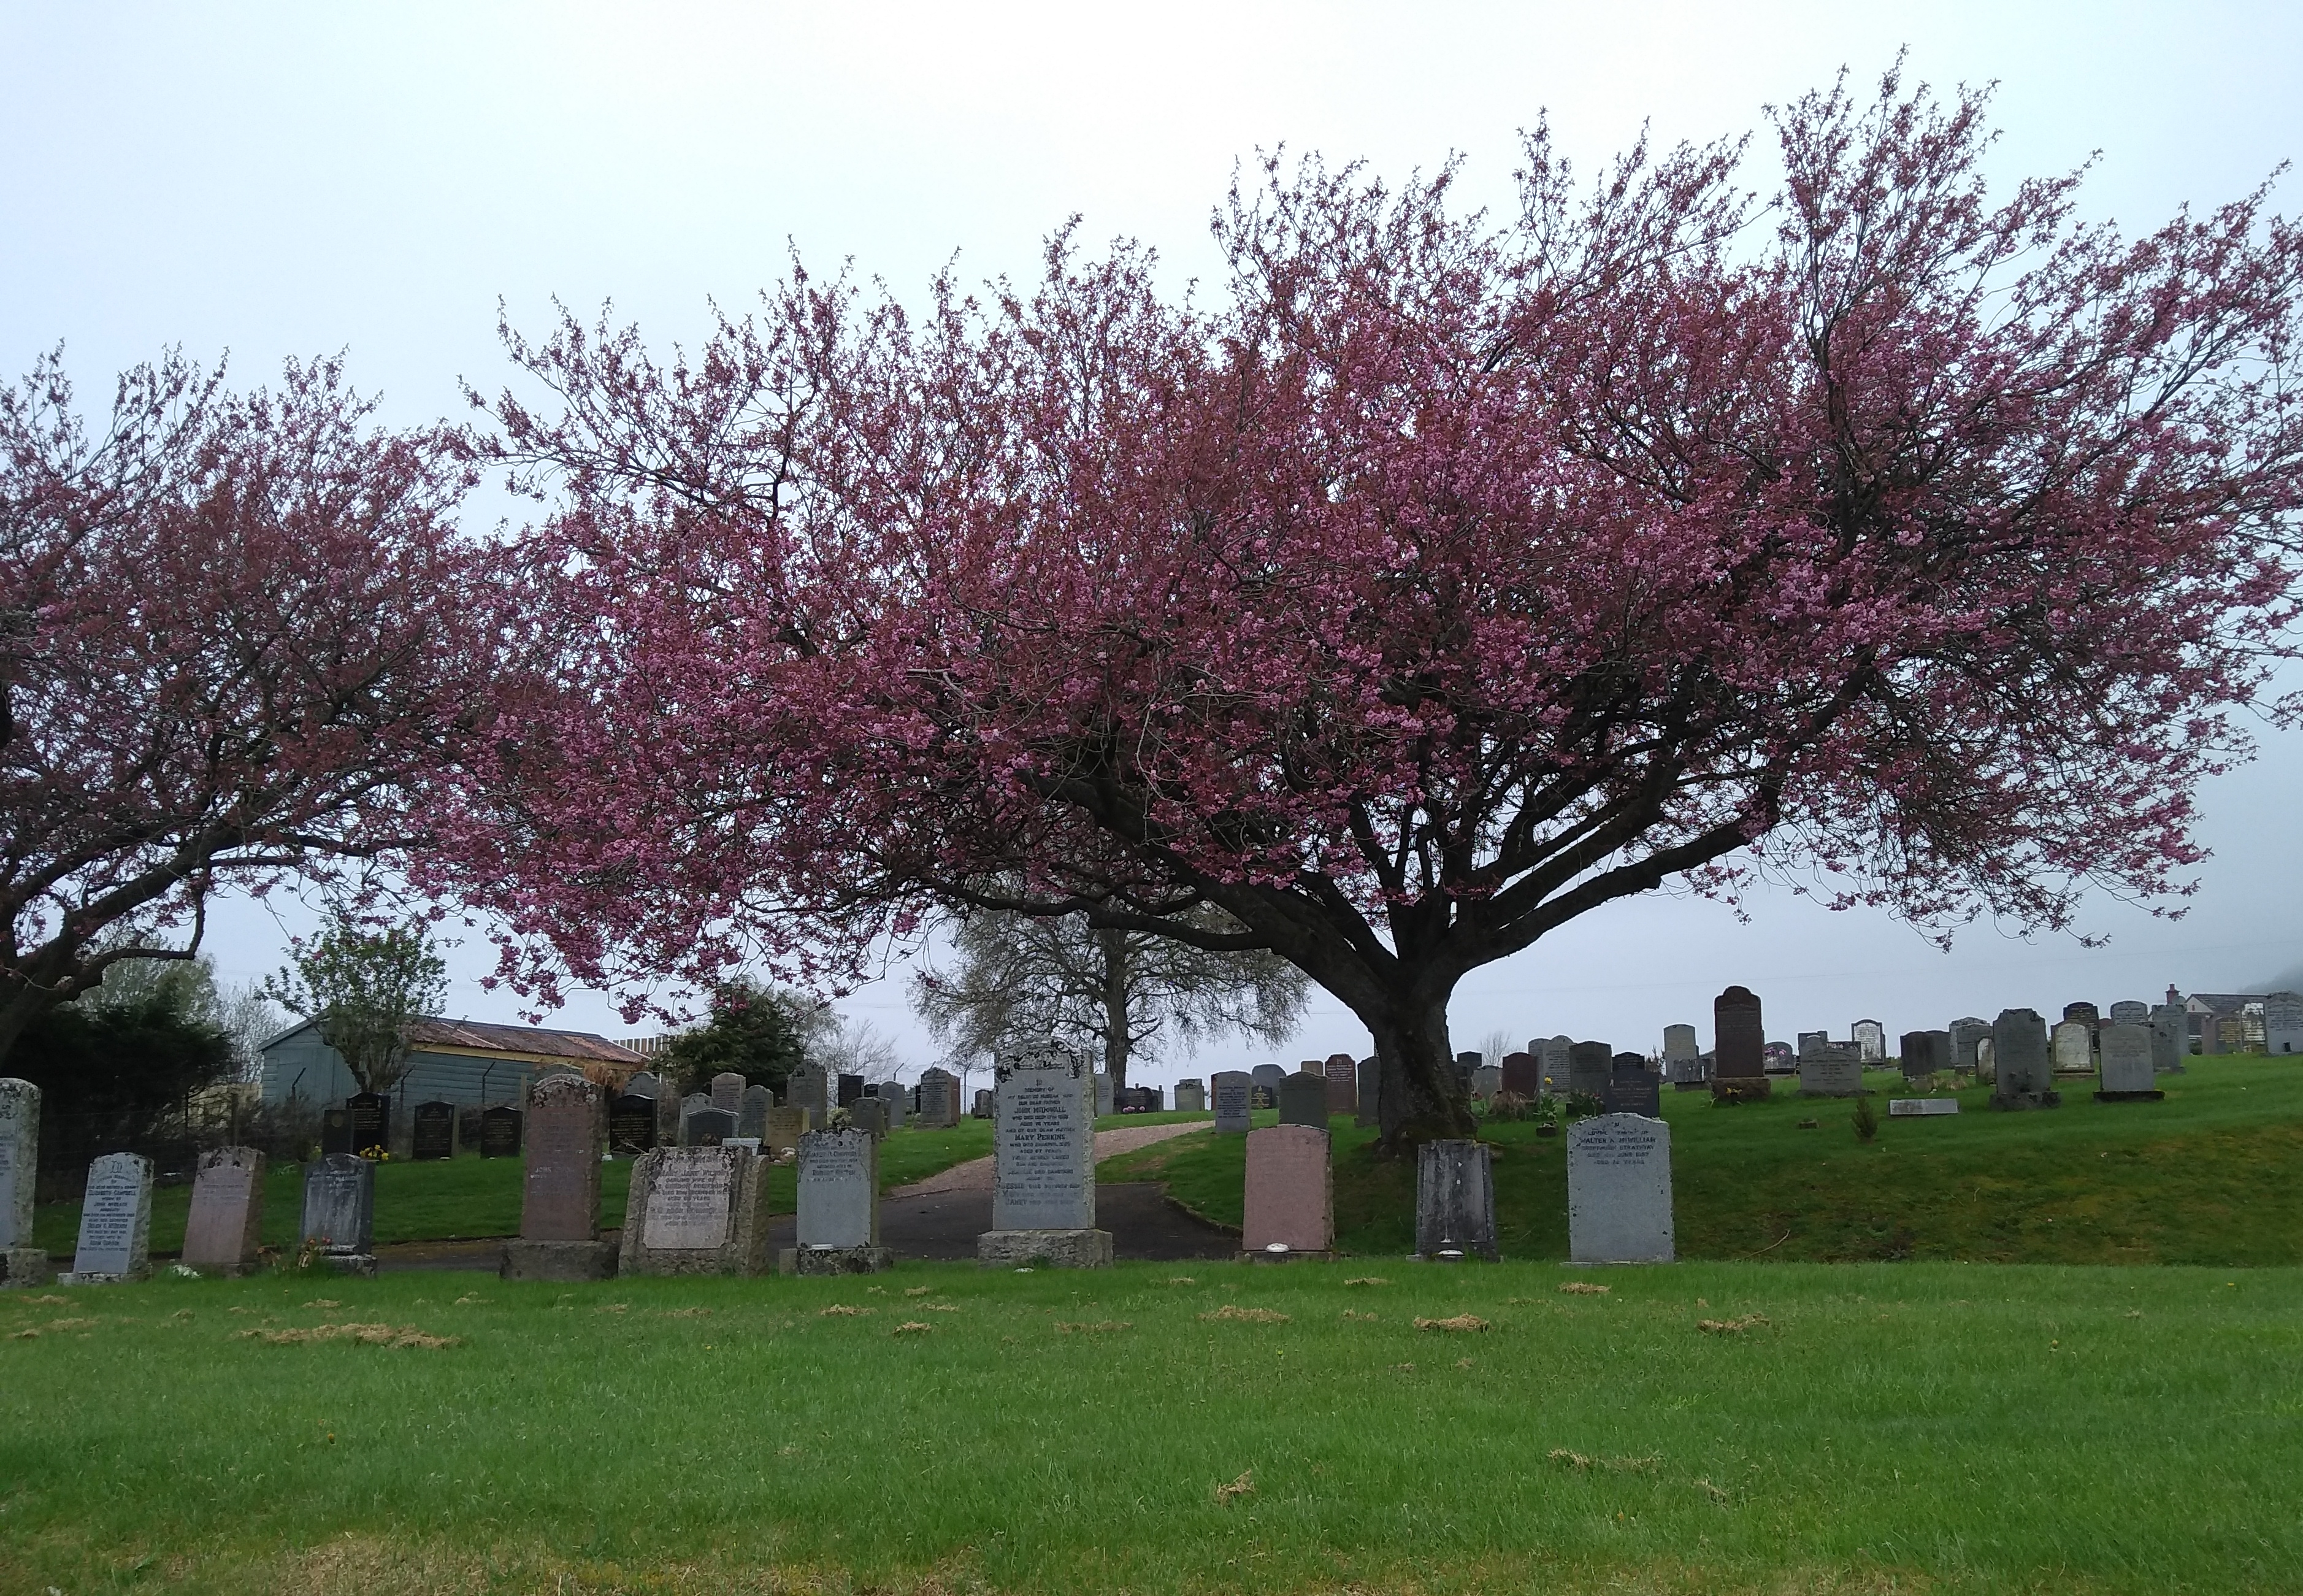 Blooming cherry tree in a little graveyard